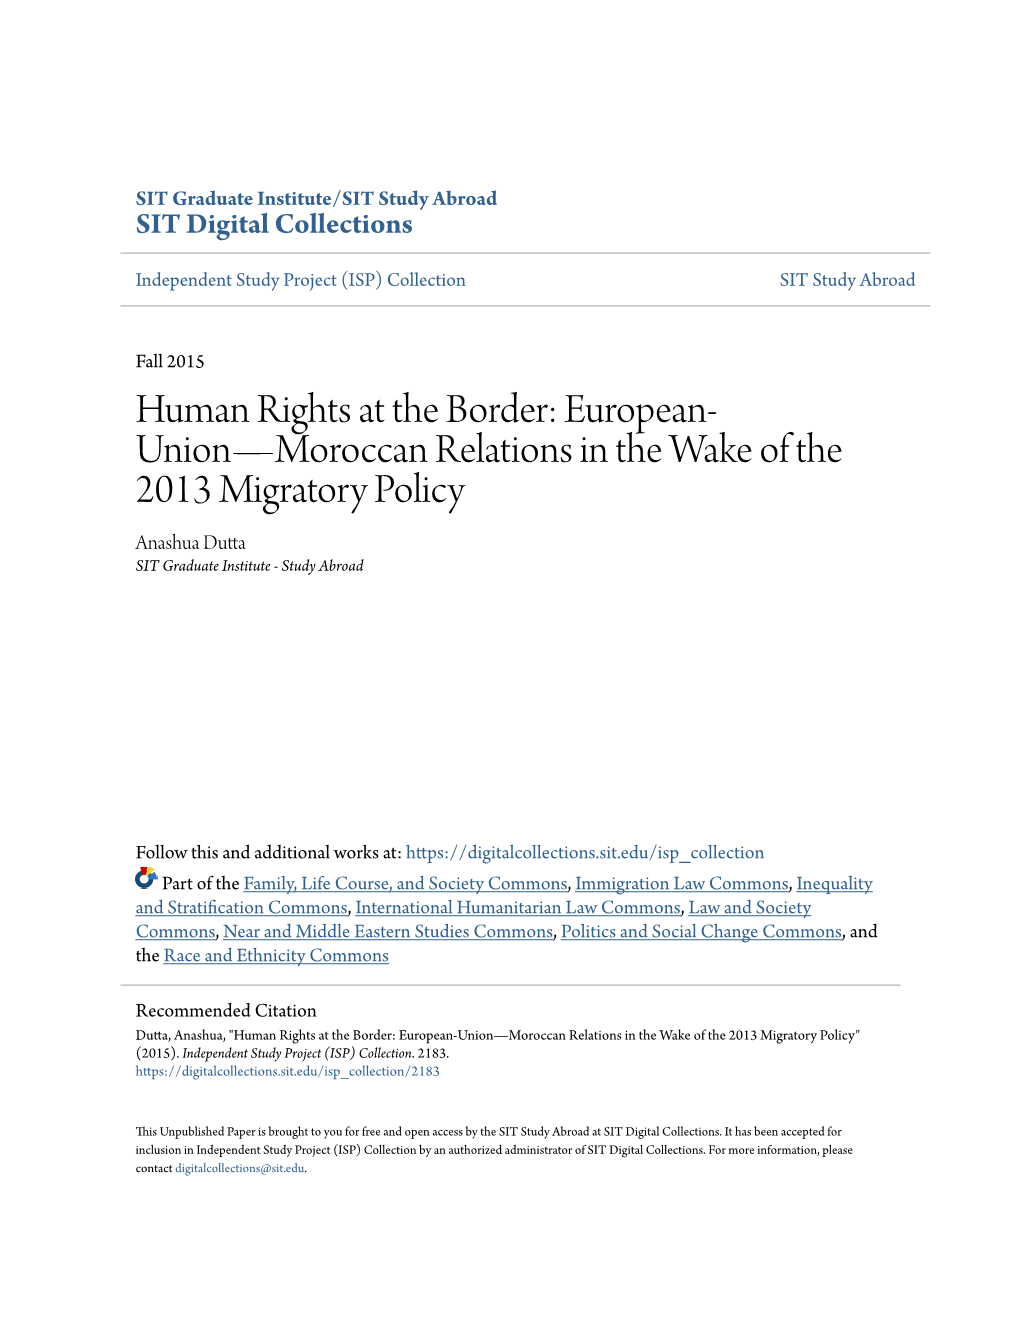 Human Rights at the Border: European-Union—Moroccan Relations in the Wake of the 2013 Migratory Policy" (2015)